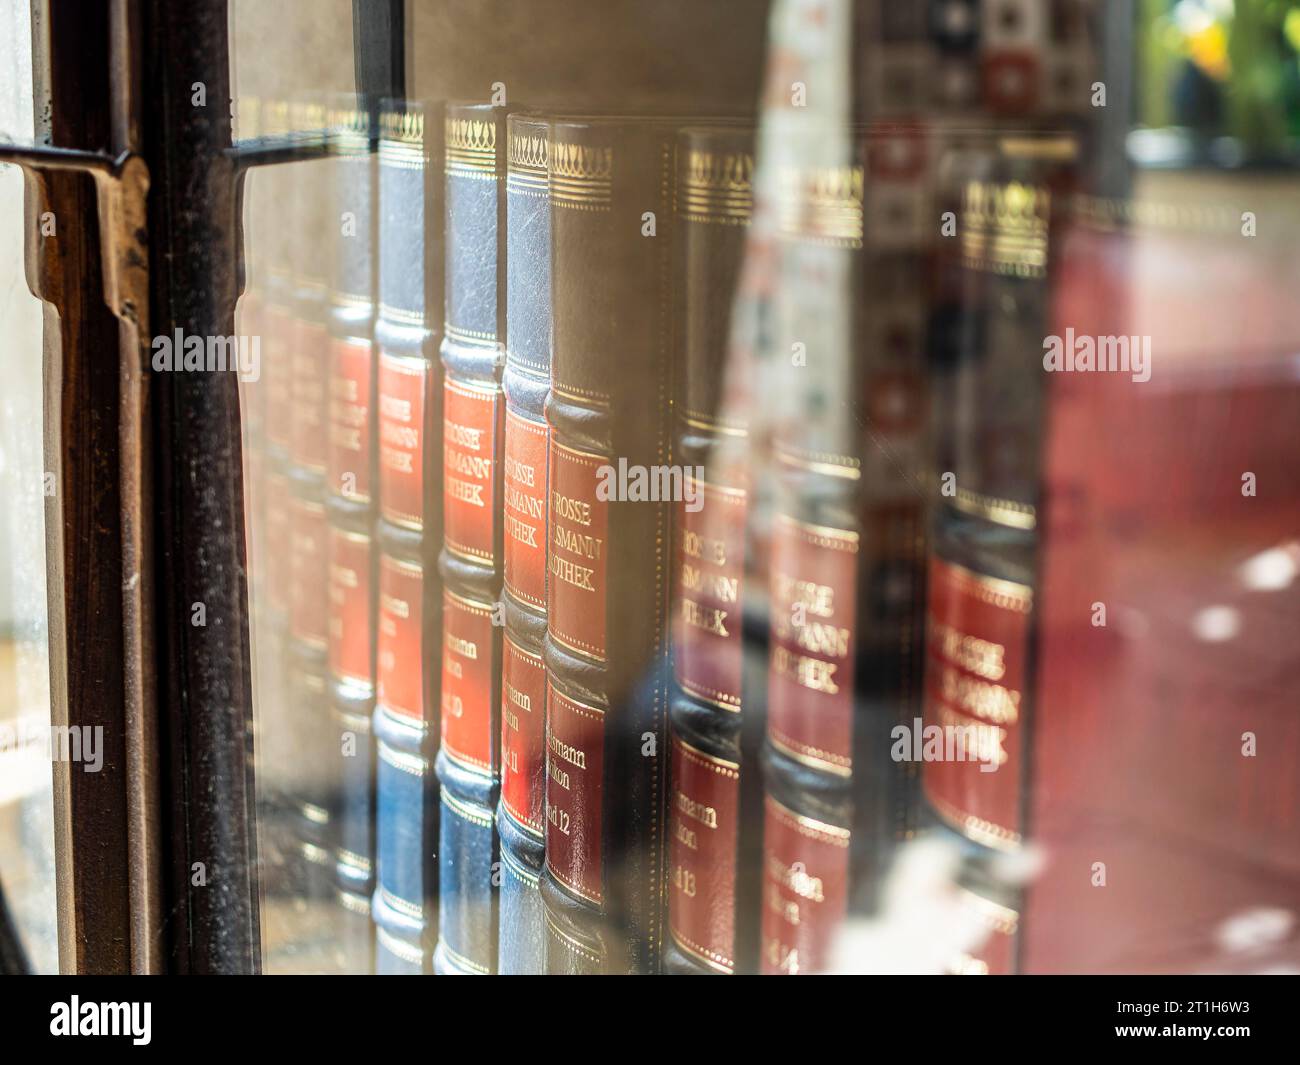 Books and encyclopaedias in old glass case Stock Photo